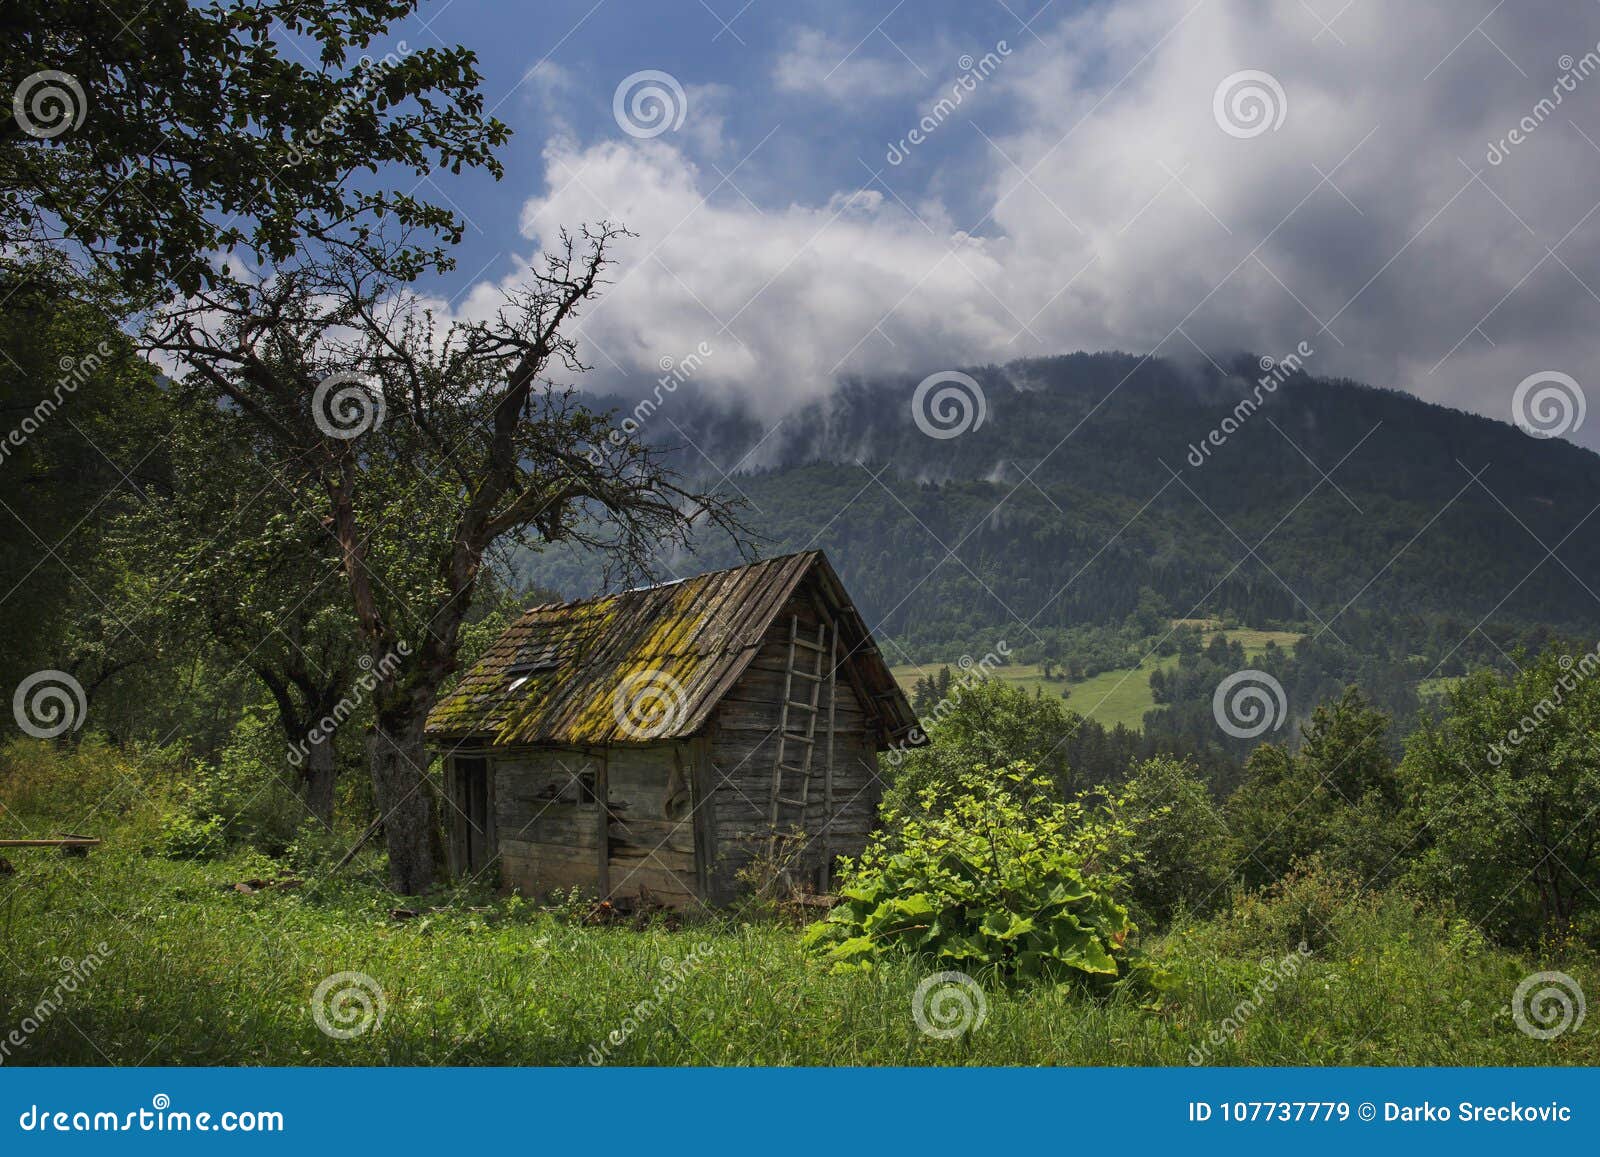 Old Ruined Country House in the Mountain Stock Image - Image of idyllic ...